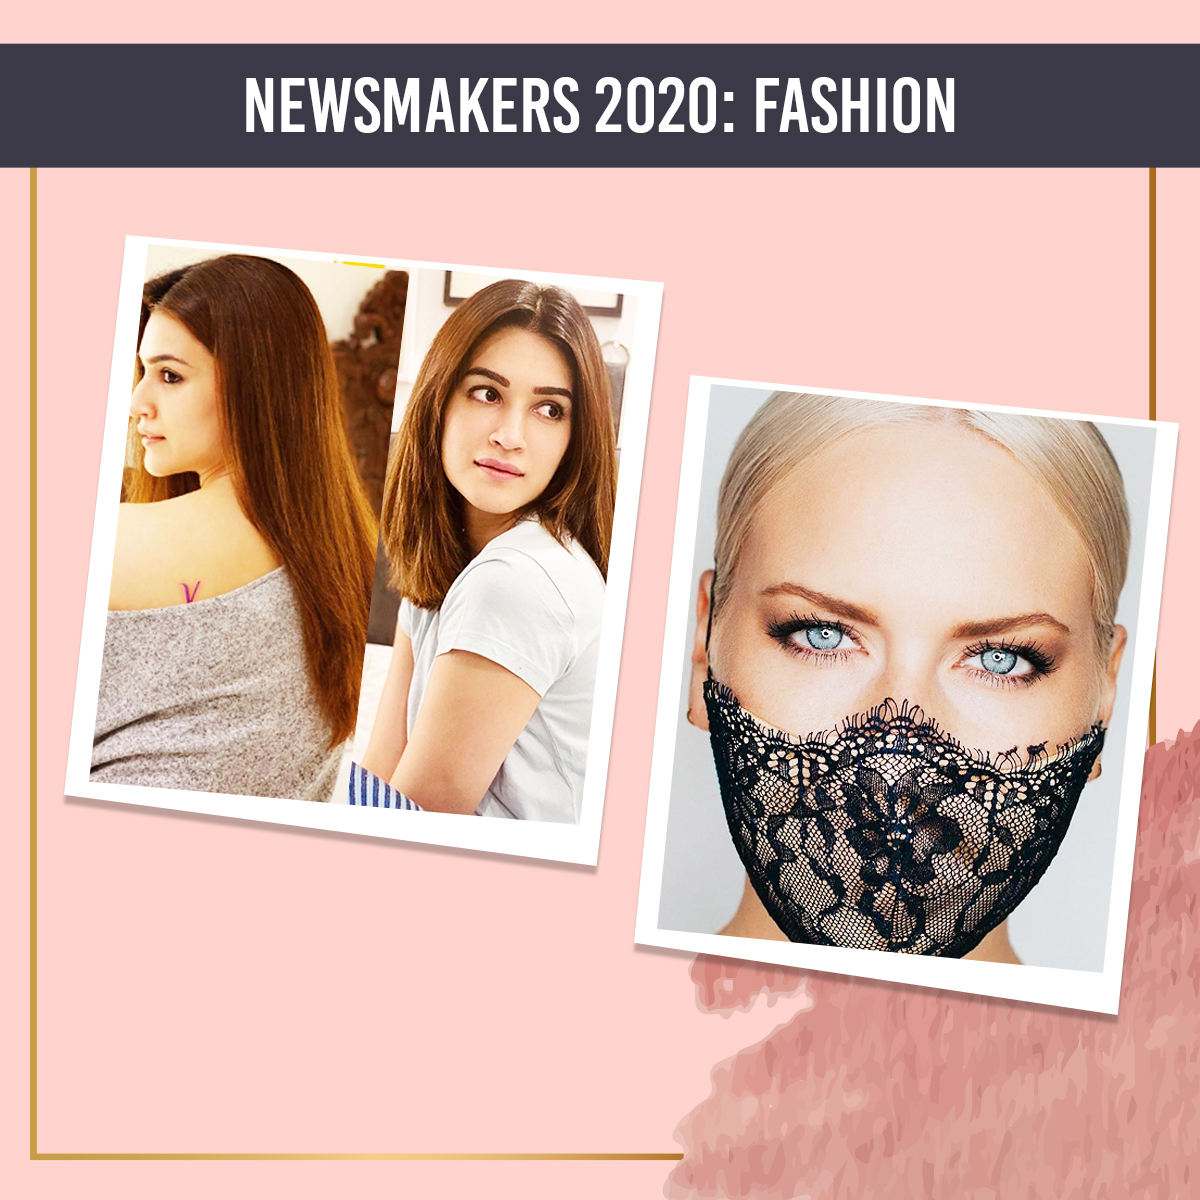 Fashion news-makers 2020: Will the industry ever be the same again?